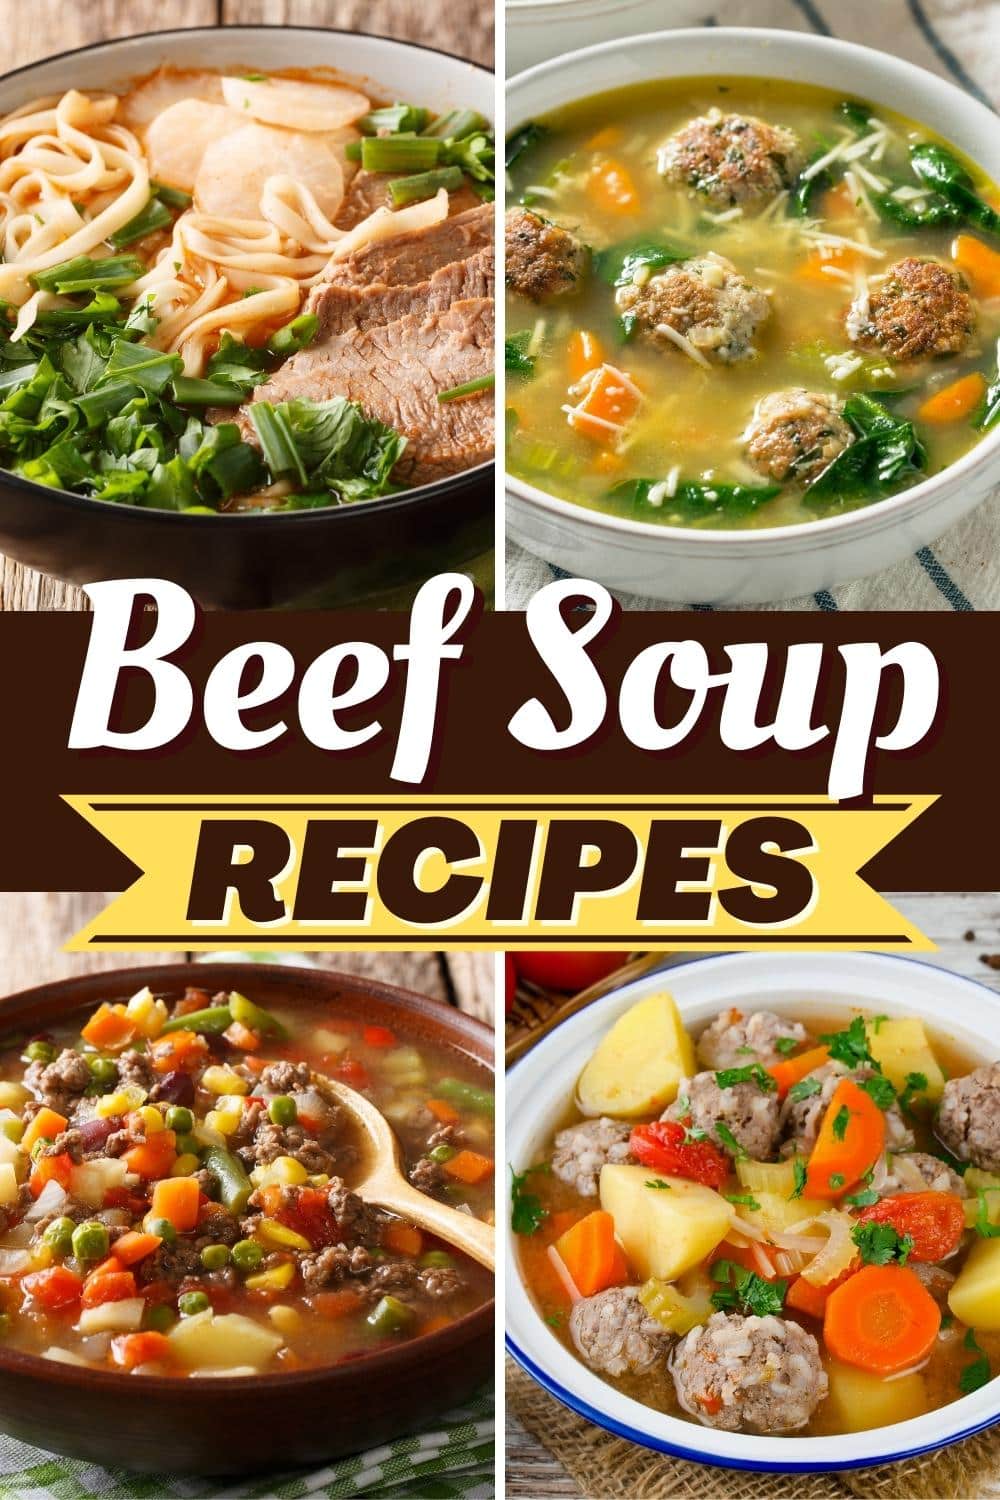 20 Hearty Beef Soup Recipes for Dinner - Insanely Good